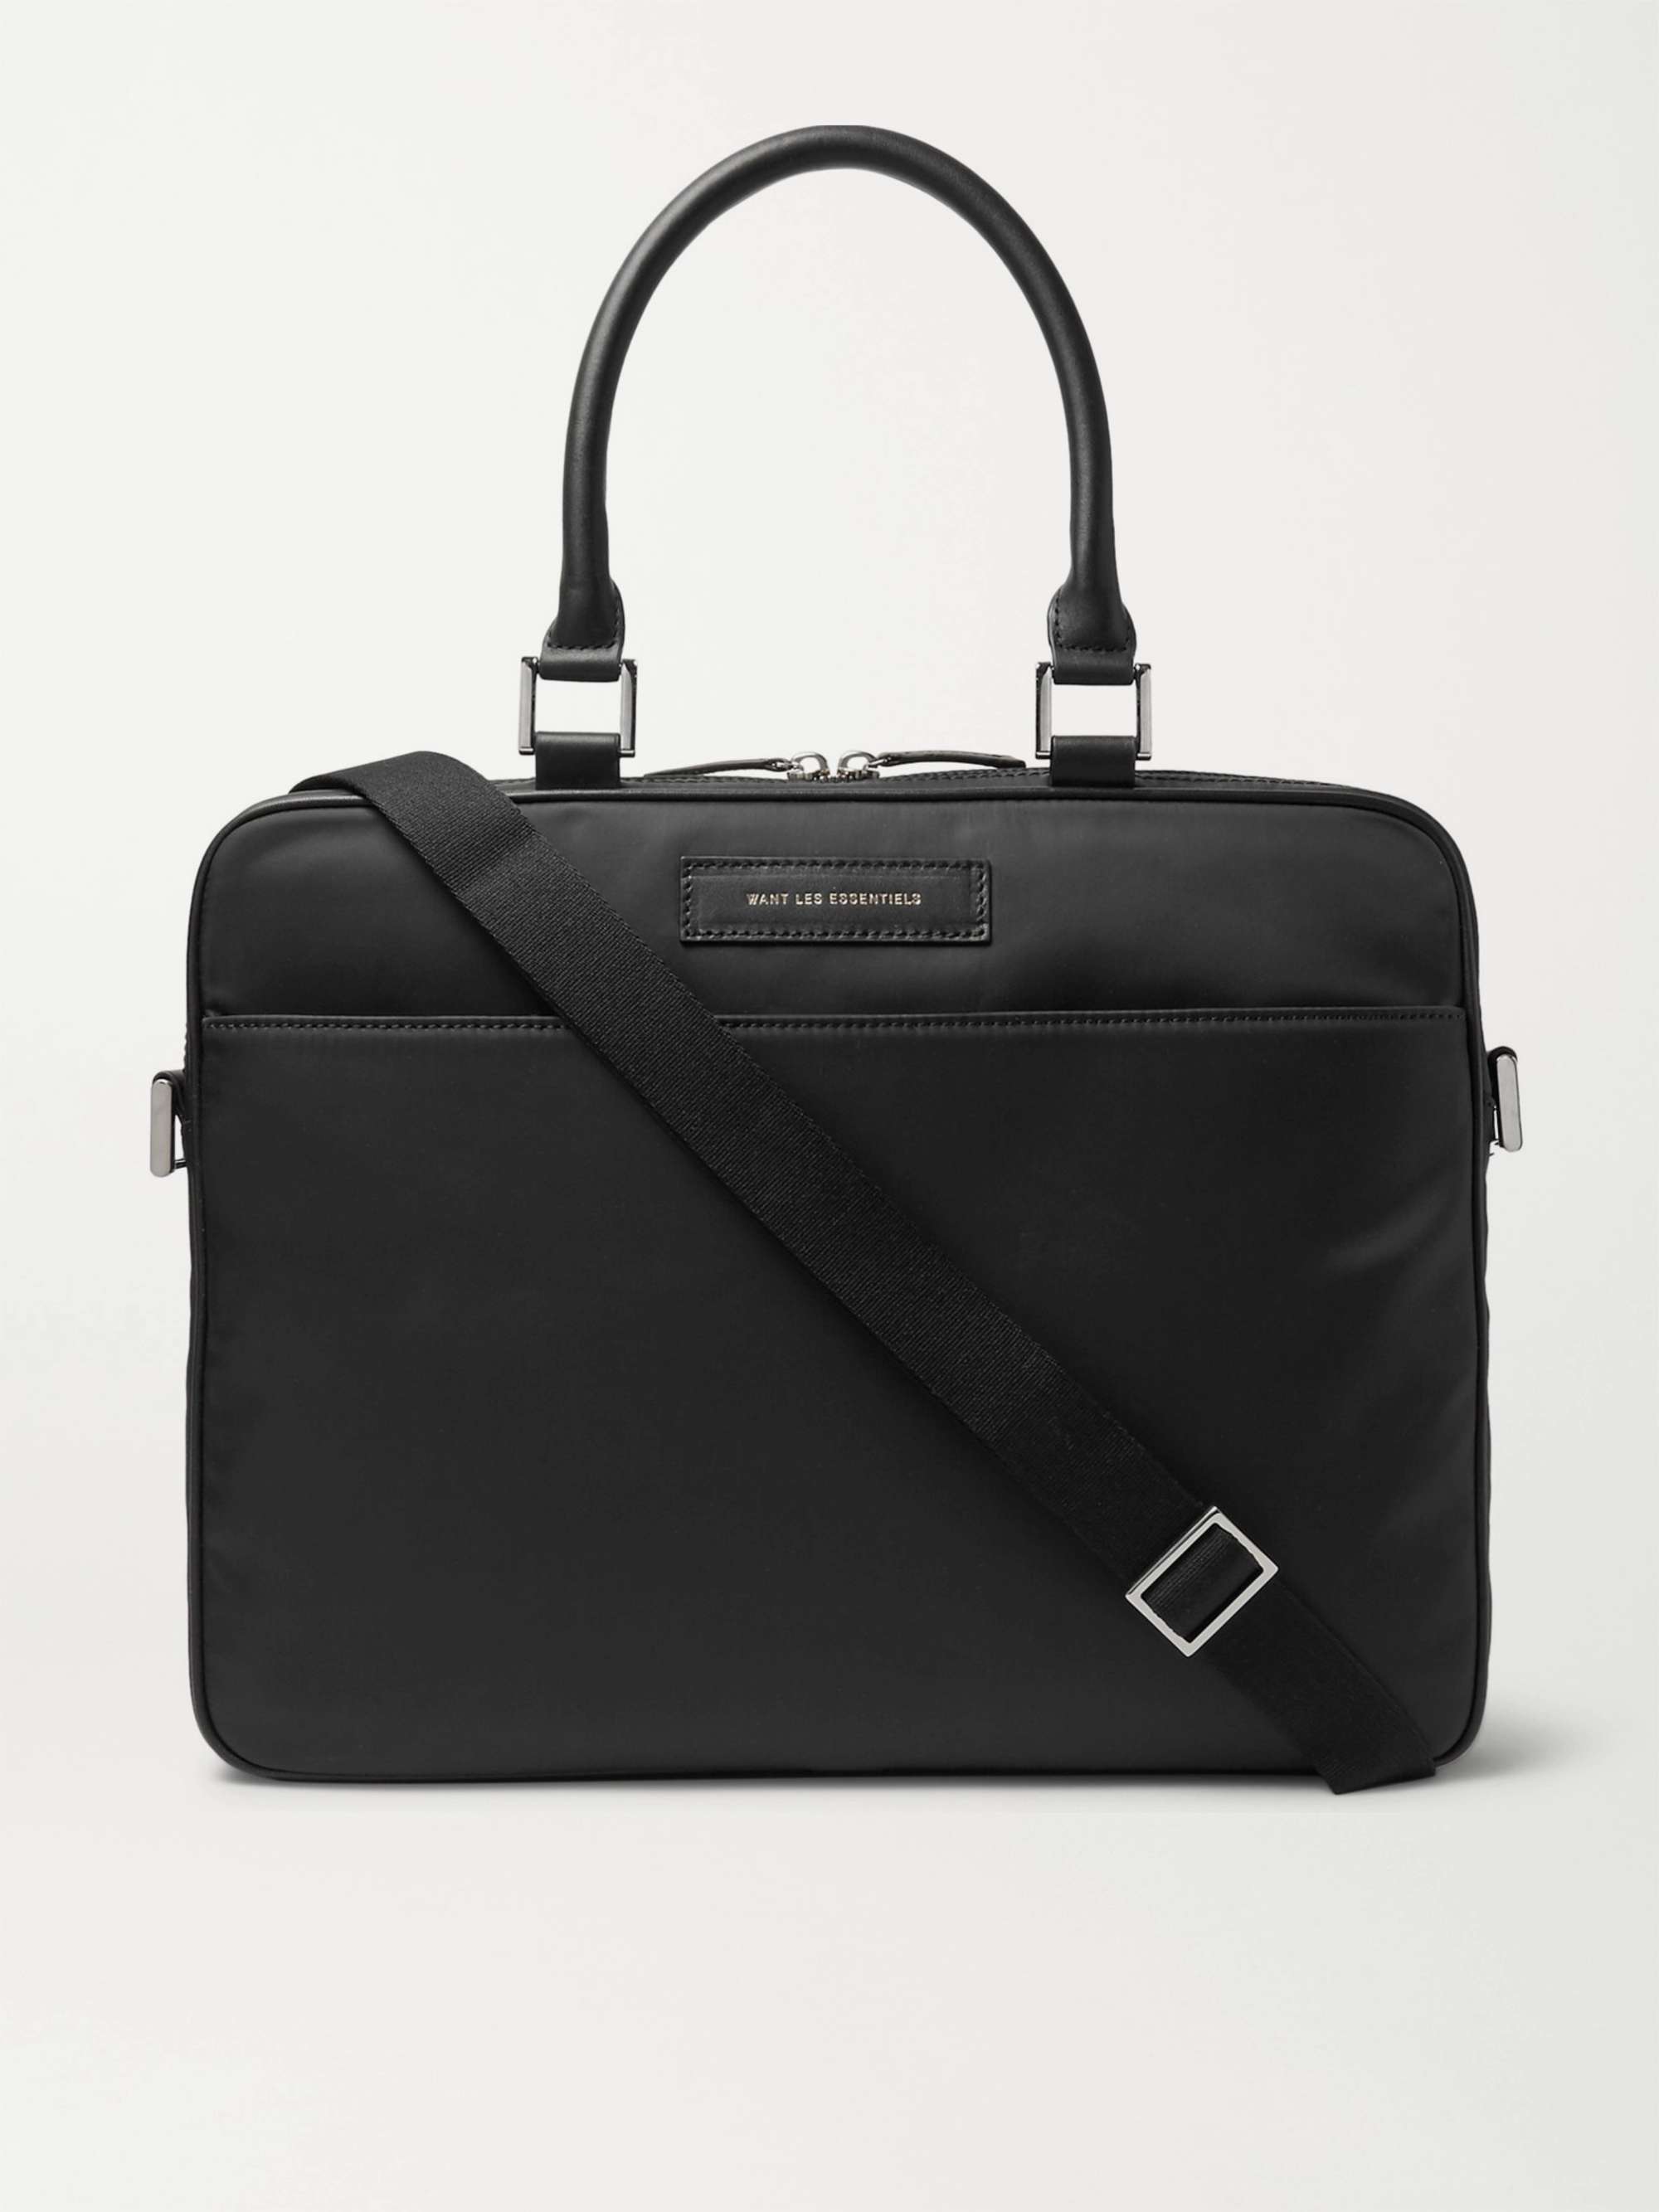 WANT LES ESSENTIELS Haneda Leather-Trimmed Nylon Briefcase